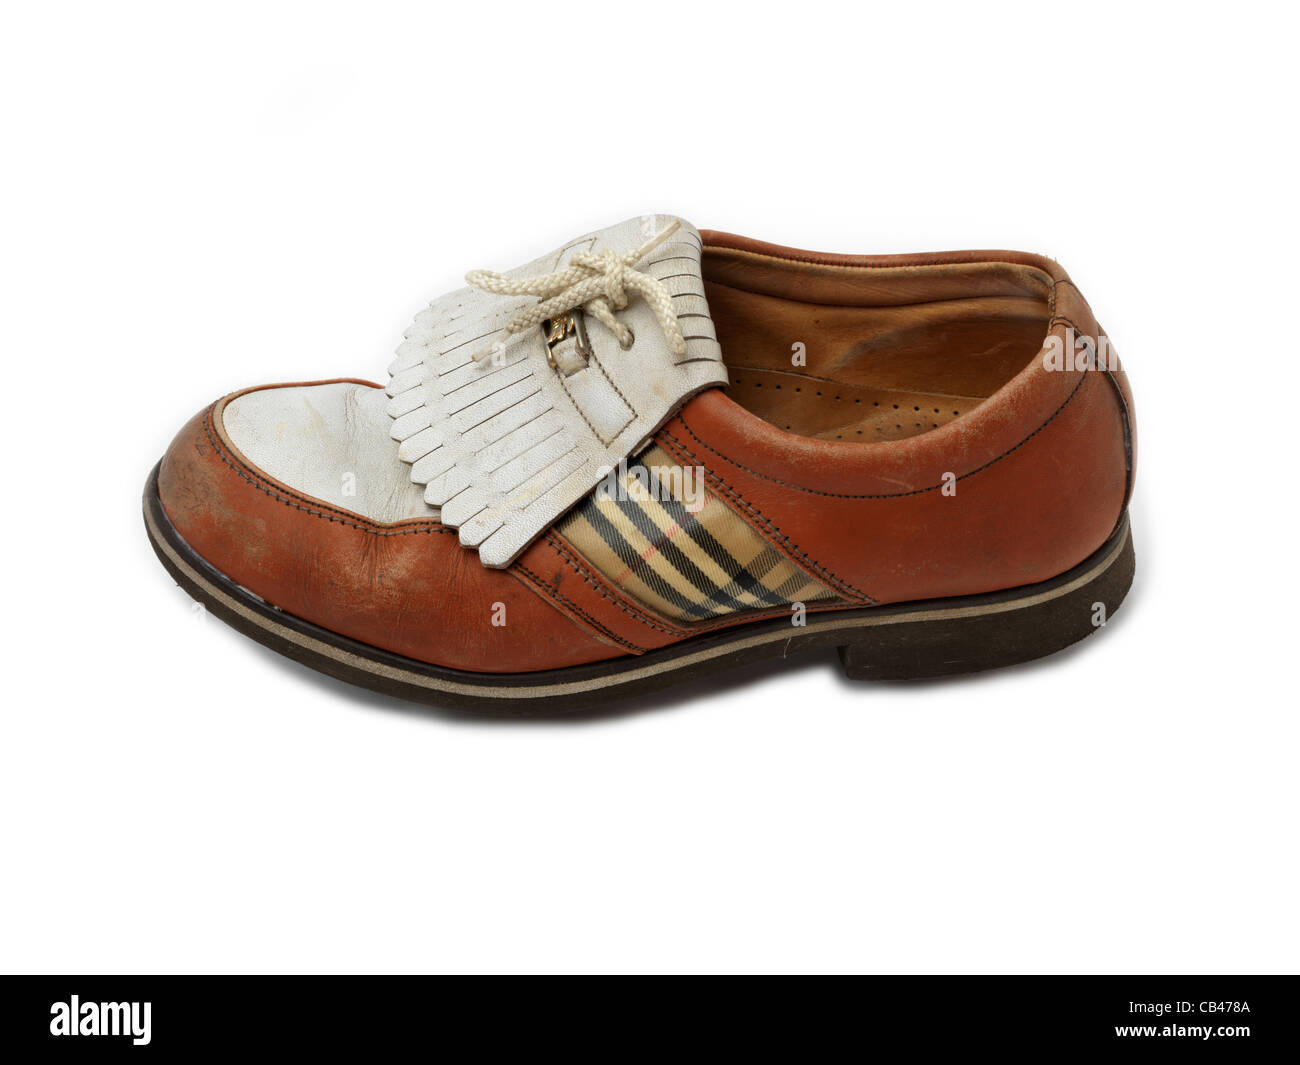 Burberry Studded Golf Shoes Stock Photo 